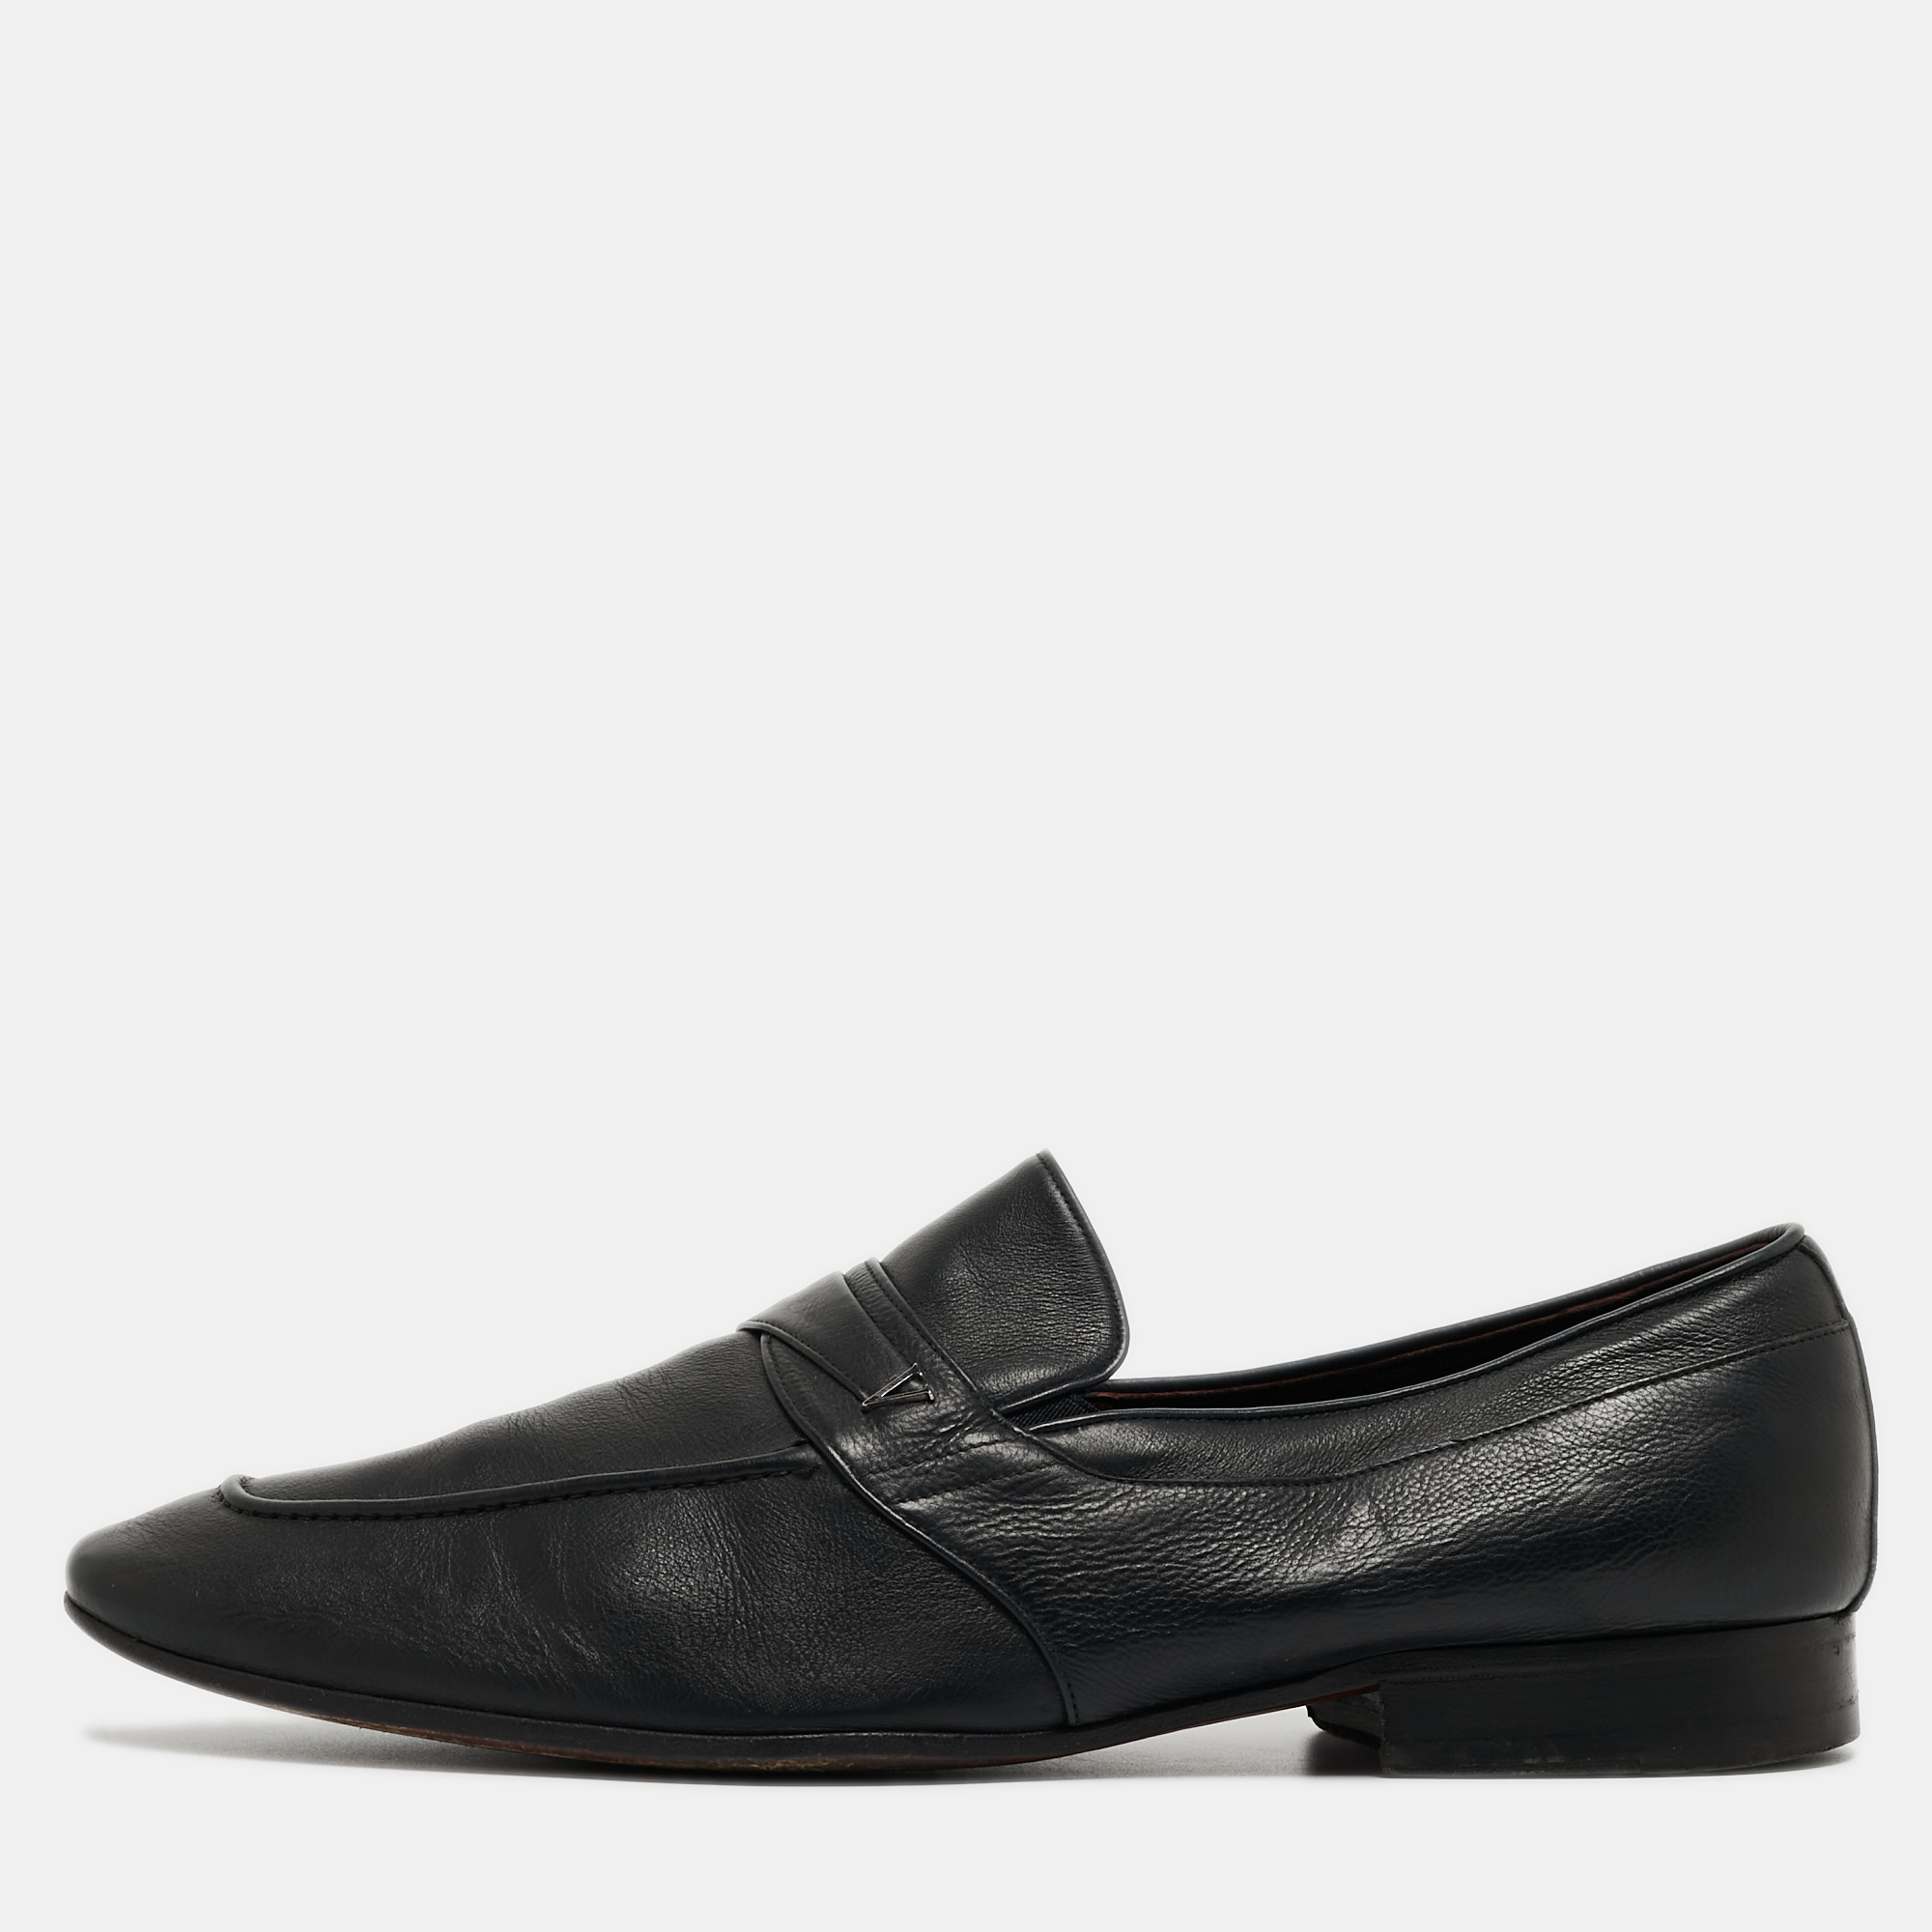 Valentino Black Leather Slip On Loafers Size 45